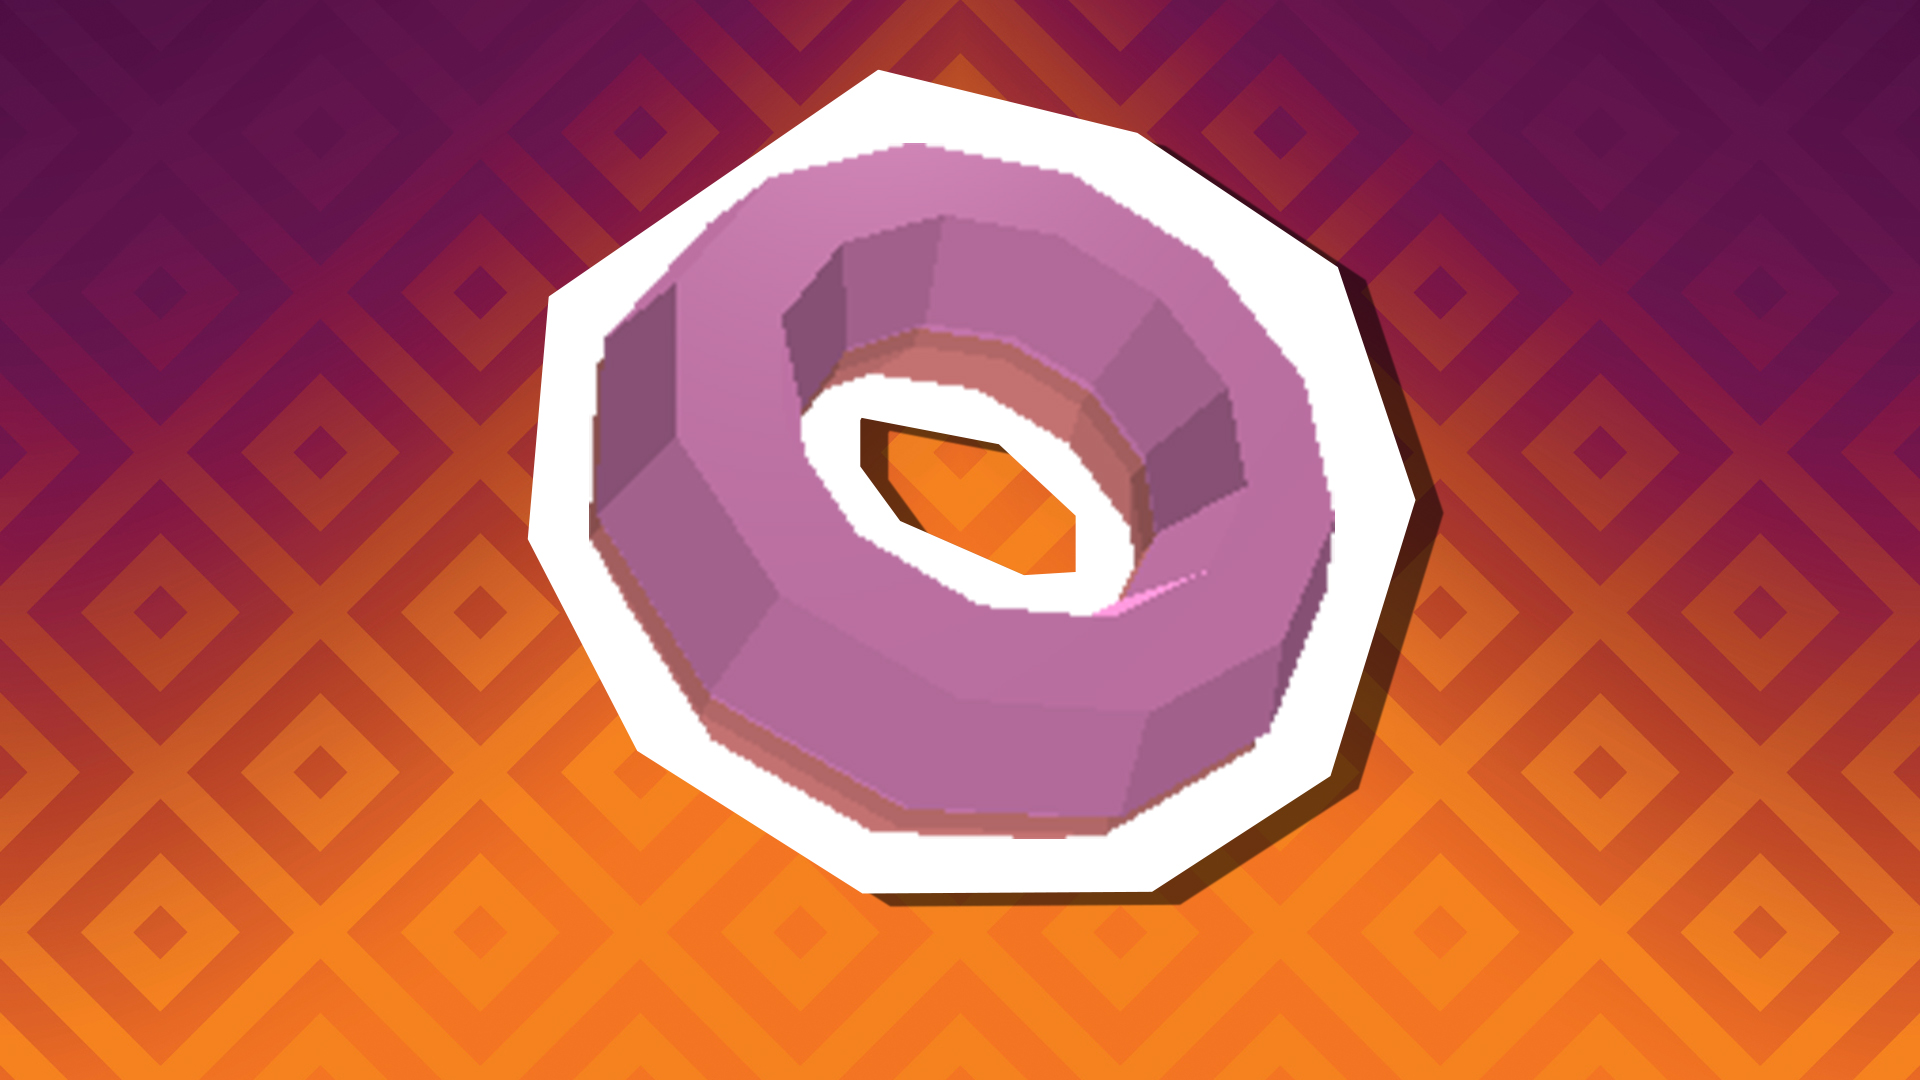 A ring donut